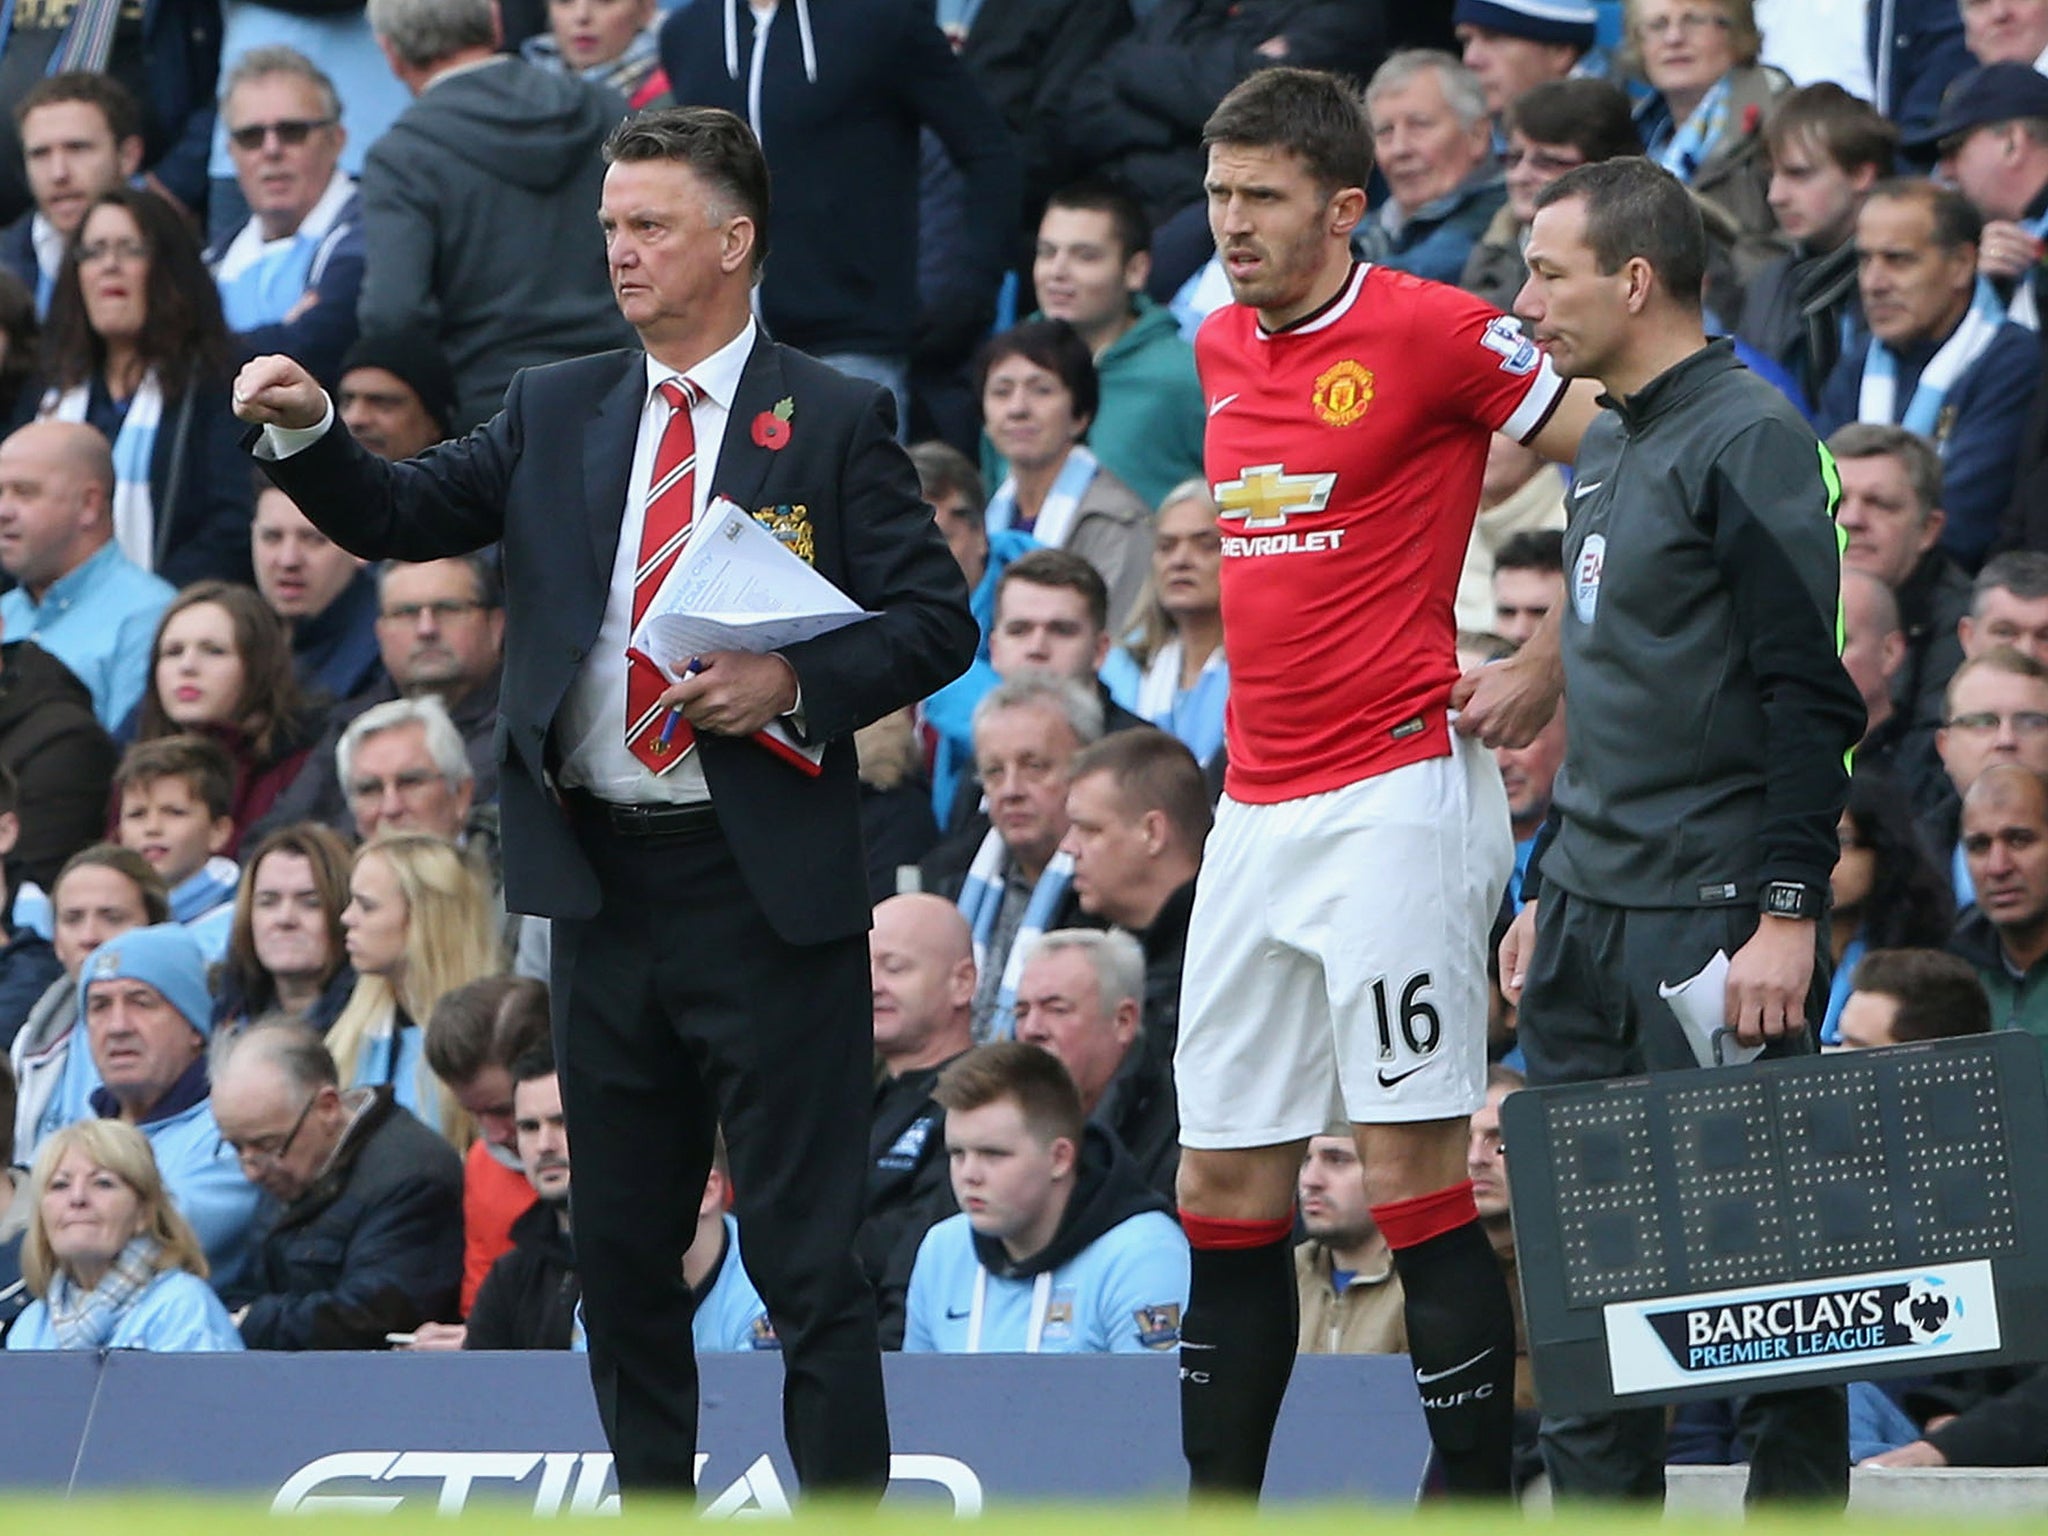 Manchester United manager Louis van Gaal brings on Michael Carrick